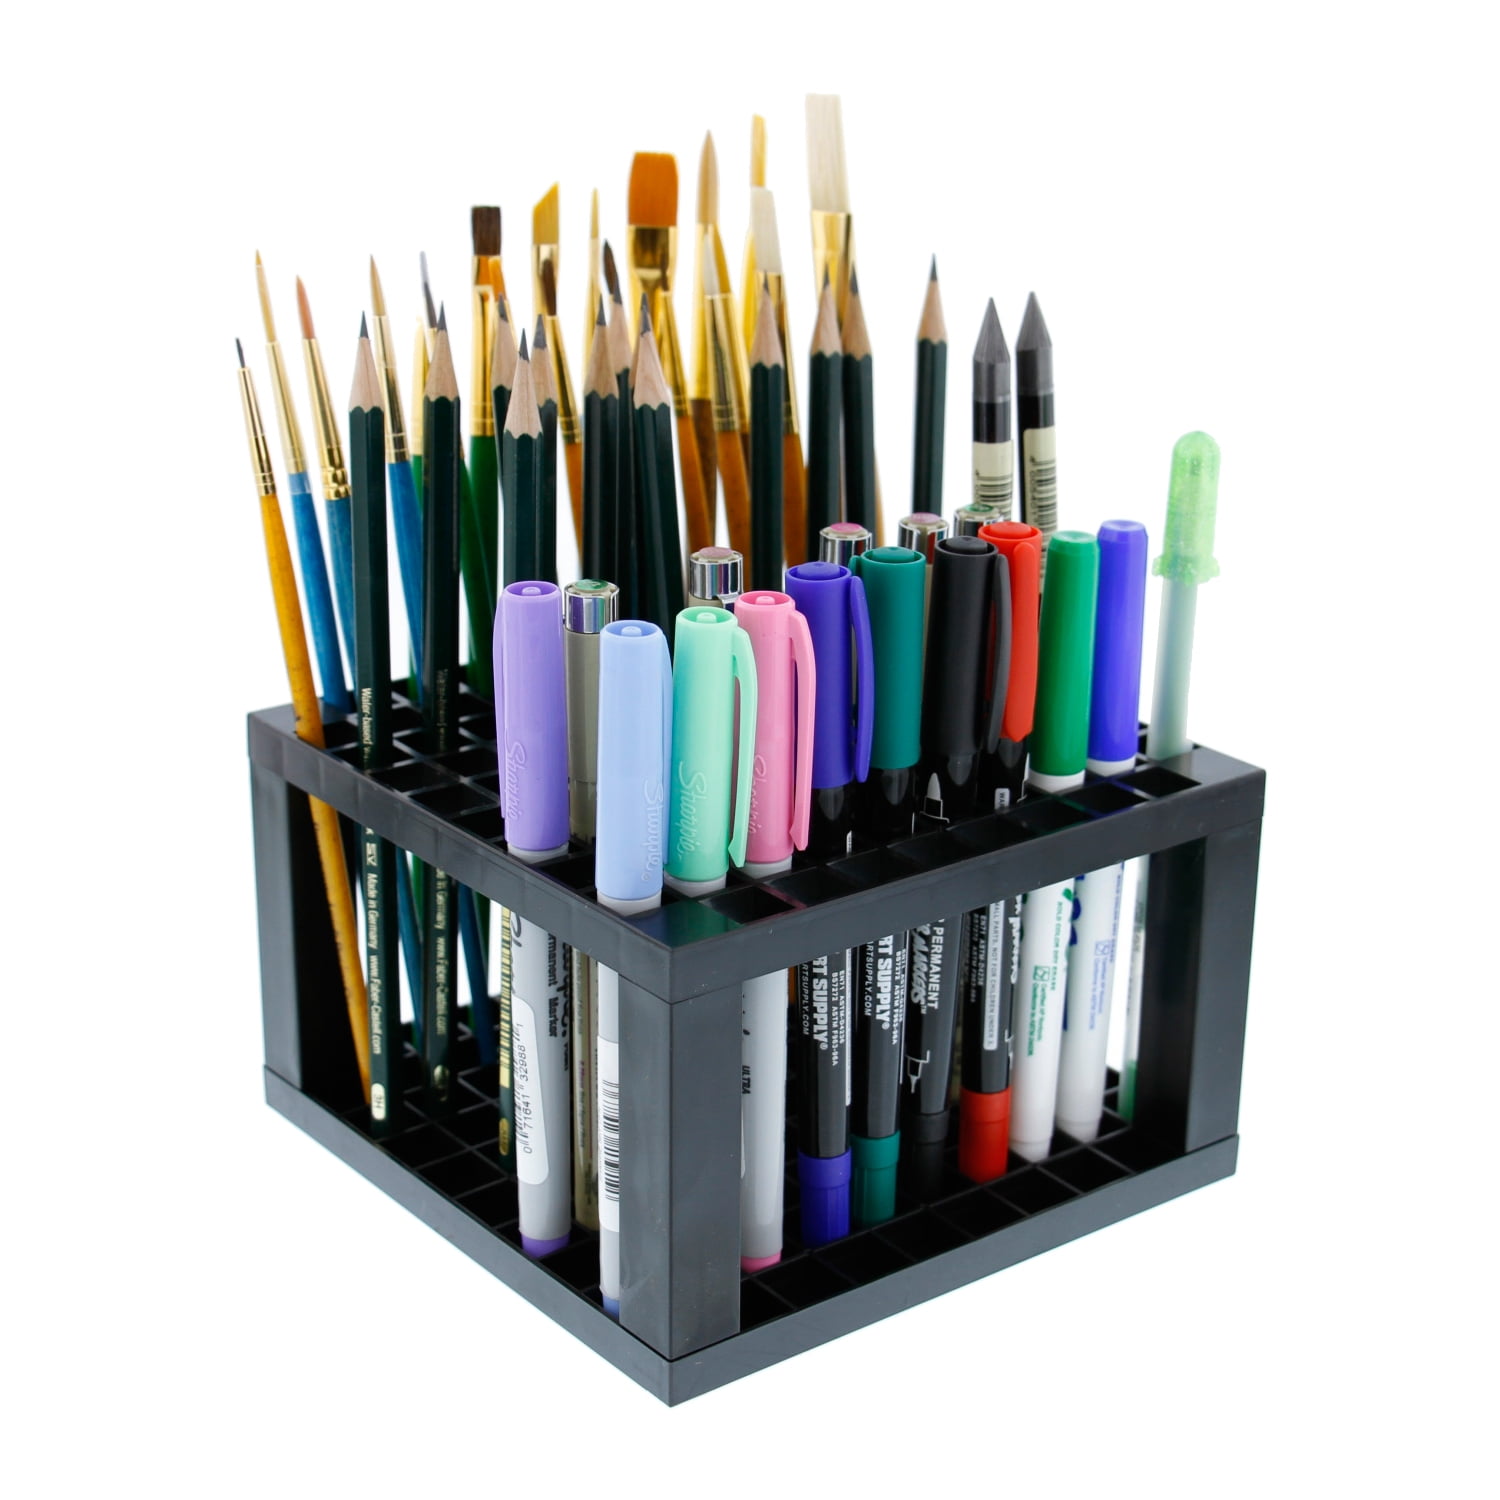  Wooden Paintbrush Holder Stand 67 Paint Brushes, Multi Art  Plastic Paint Pencil Desk Stand & Brush Holder Organizer, for Different  Size Pens, Paint Brushes, Colored Pencils